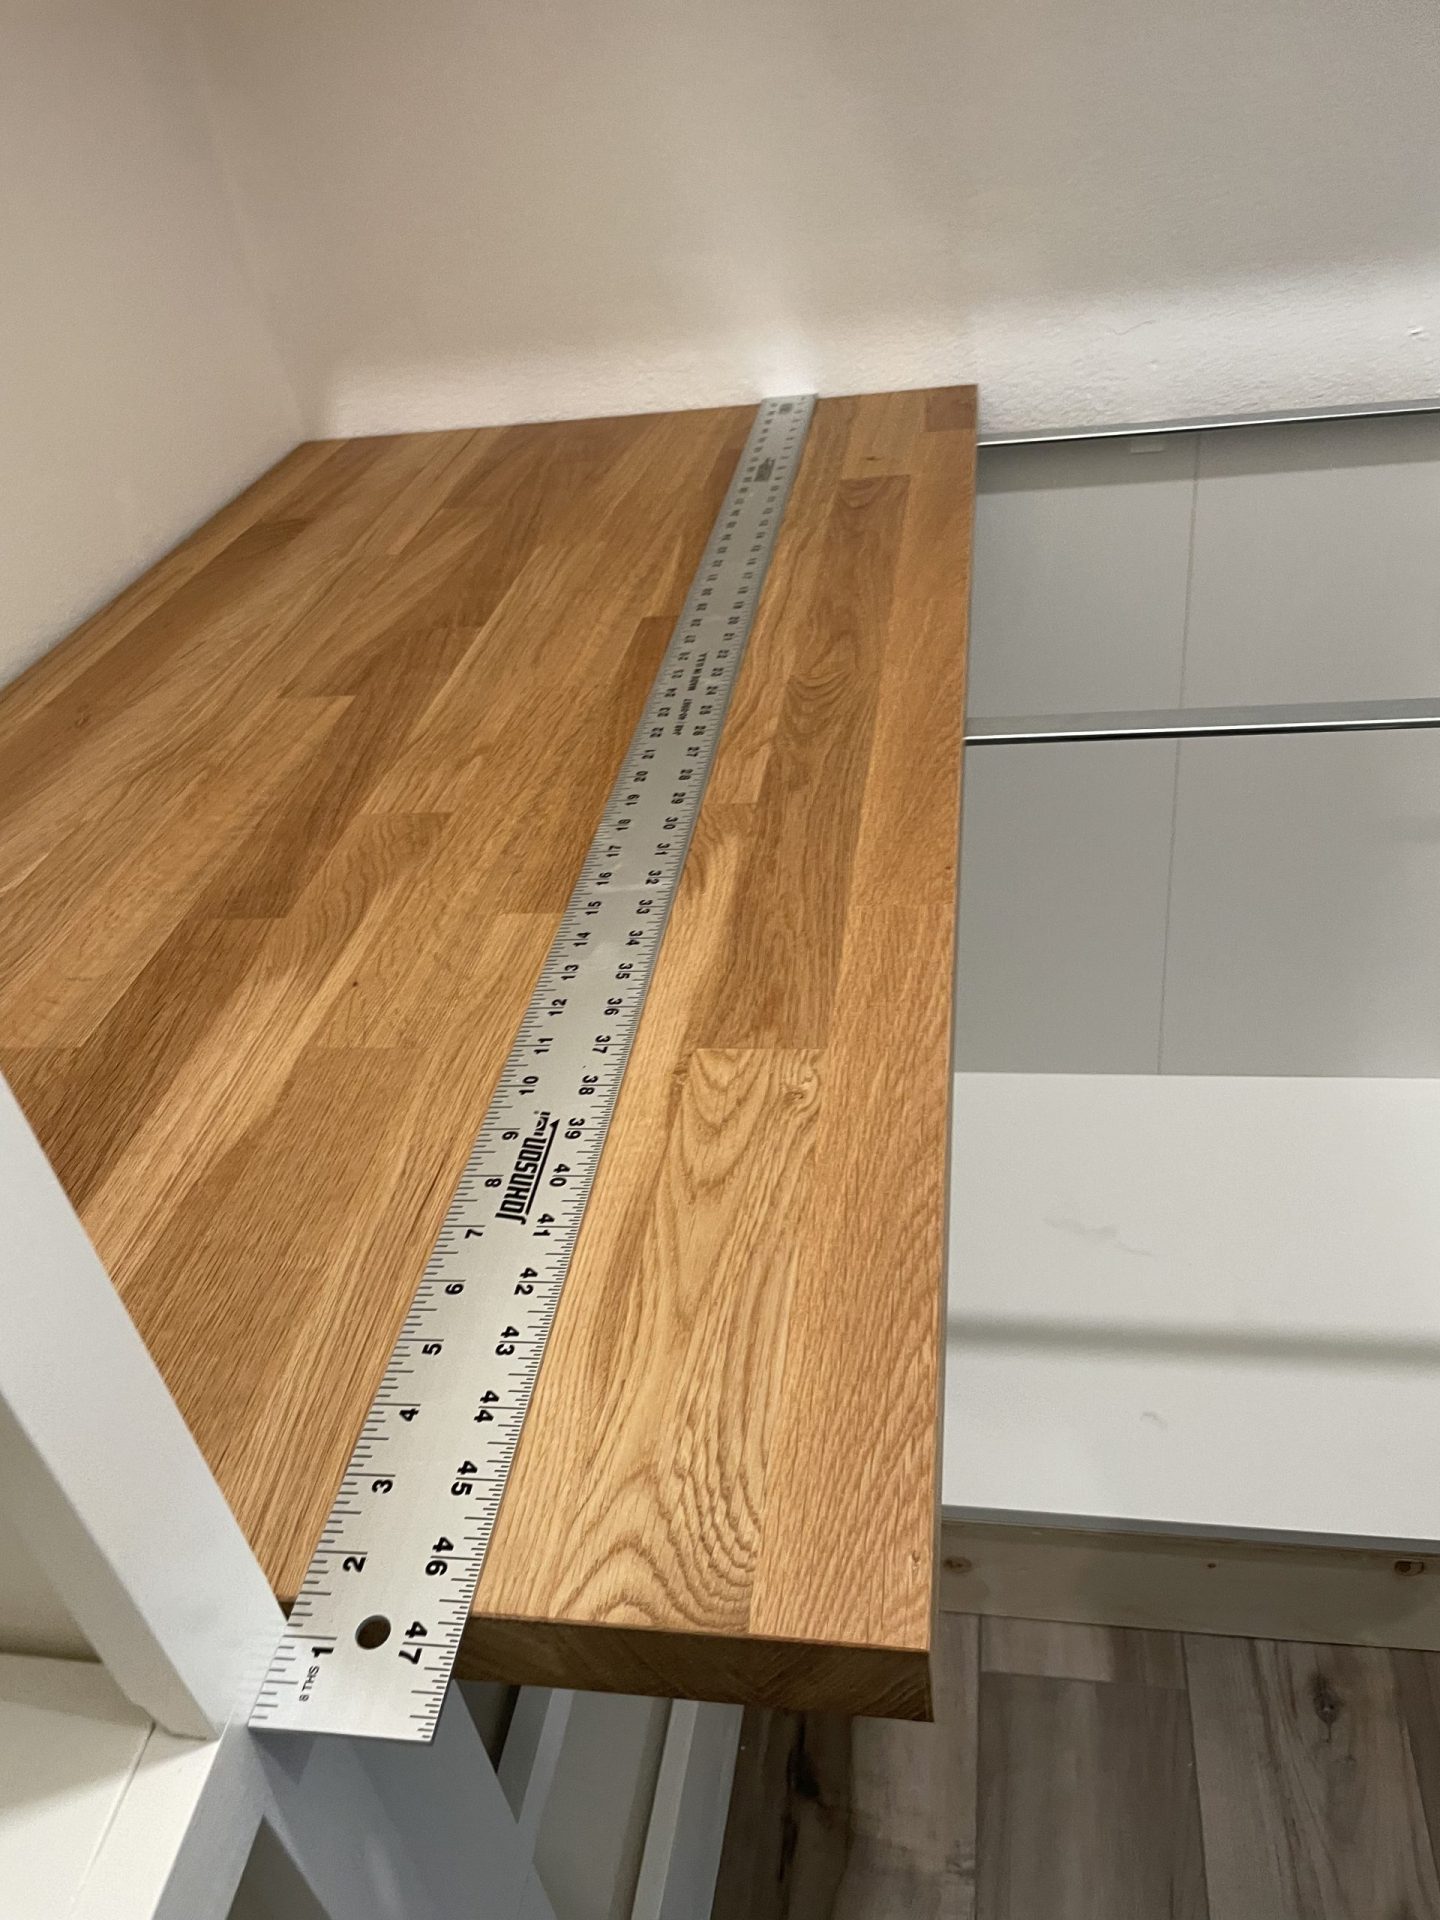 Measure countertop to cut off